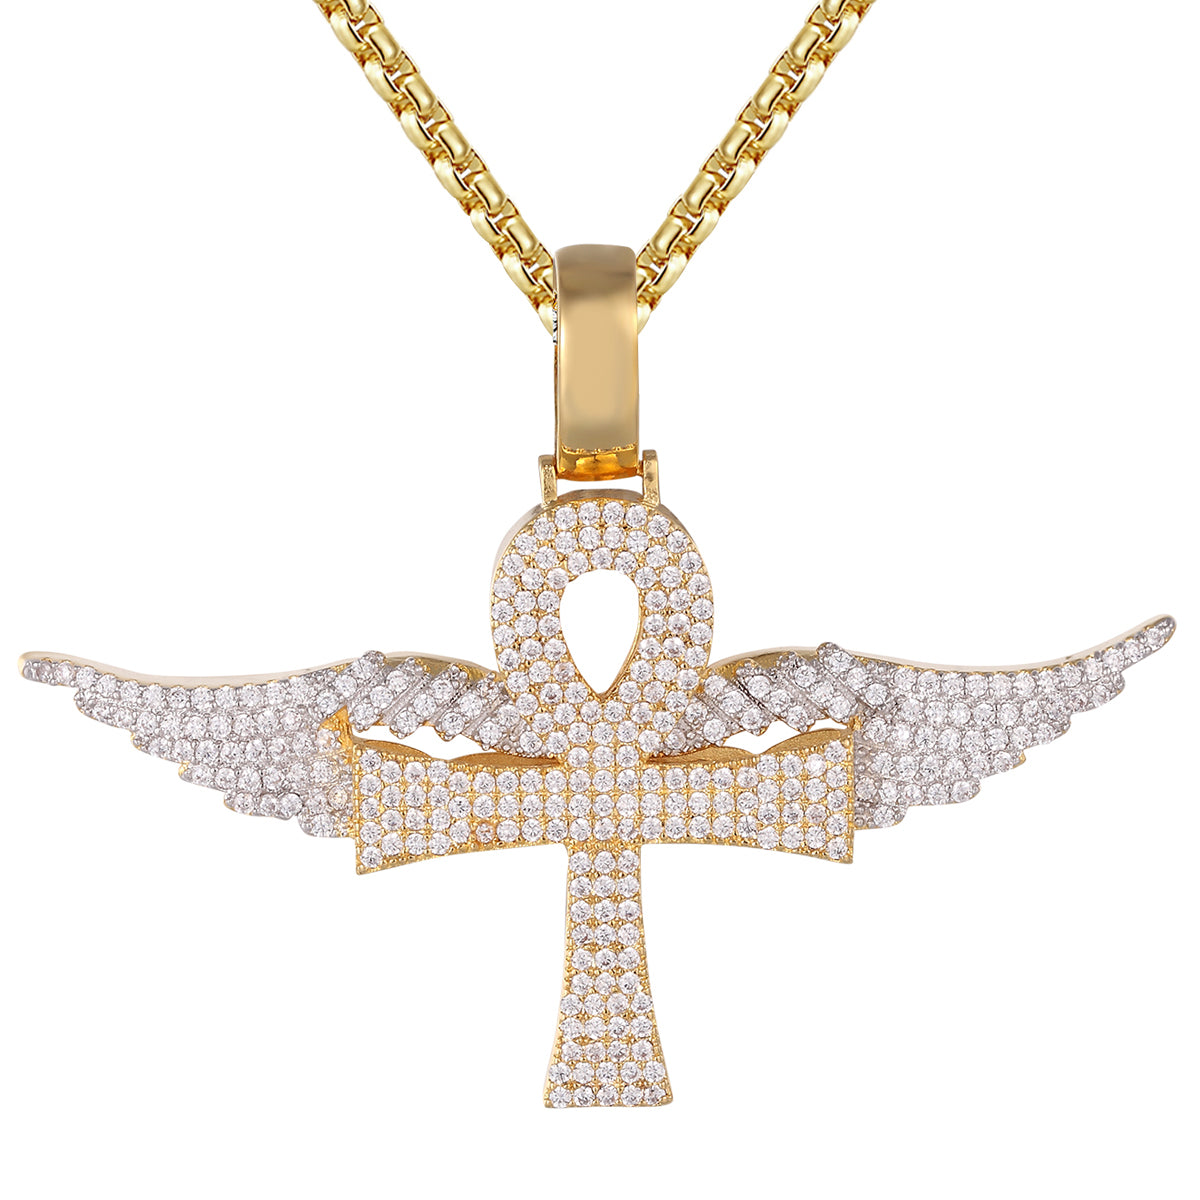 Icy Religious Ankh Cross Flying Angel Wings Gold Tone Pendant